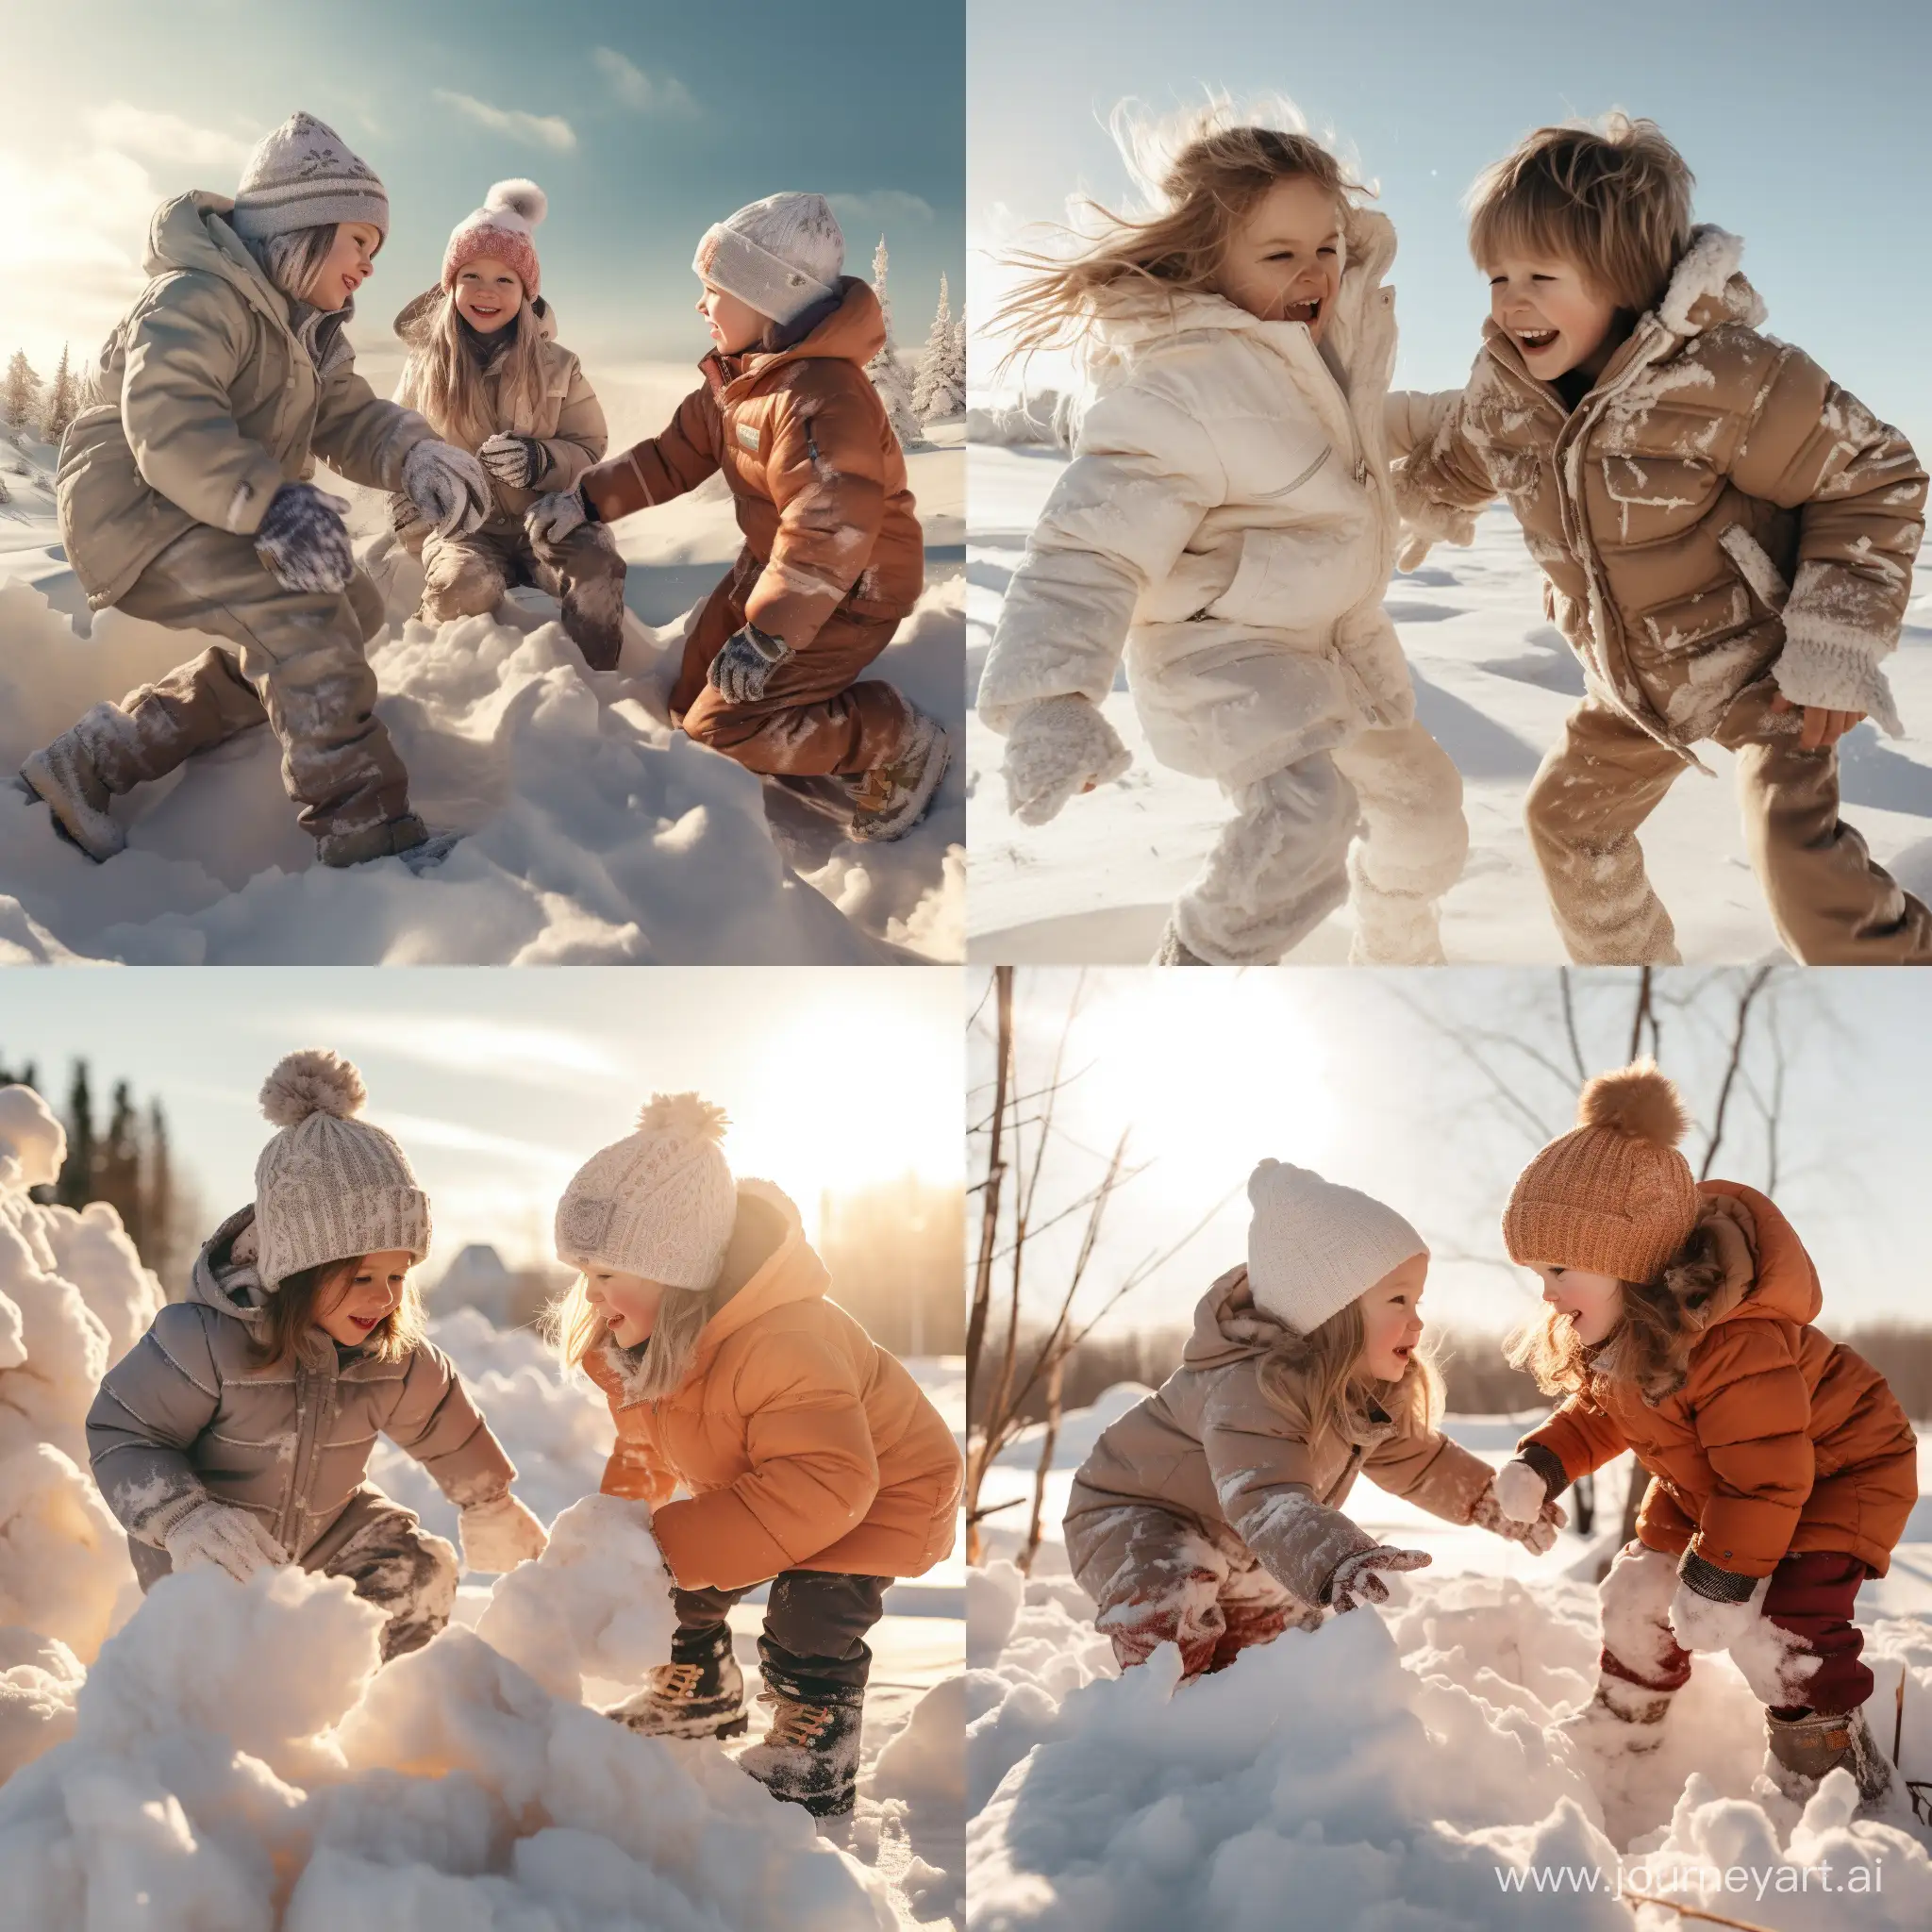 Joyful-Winter-Snowball-Fight-and-Fort-Building